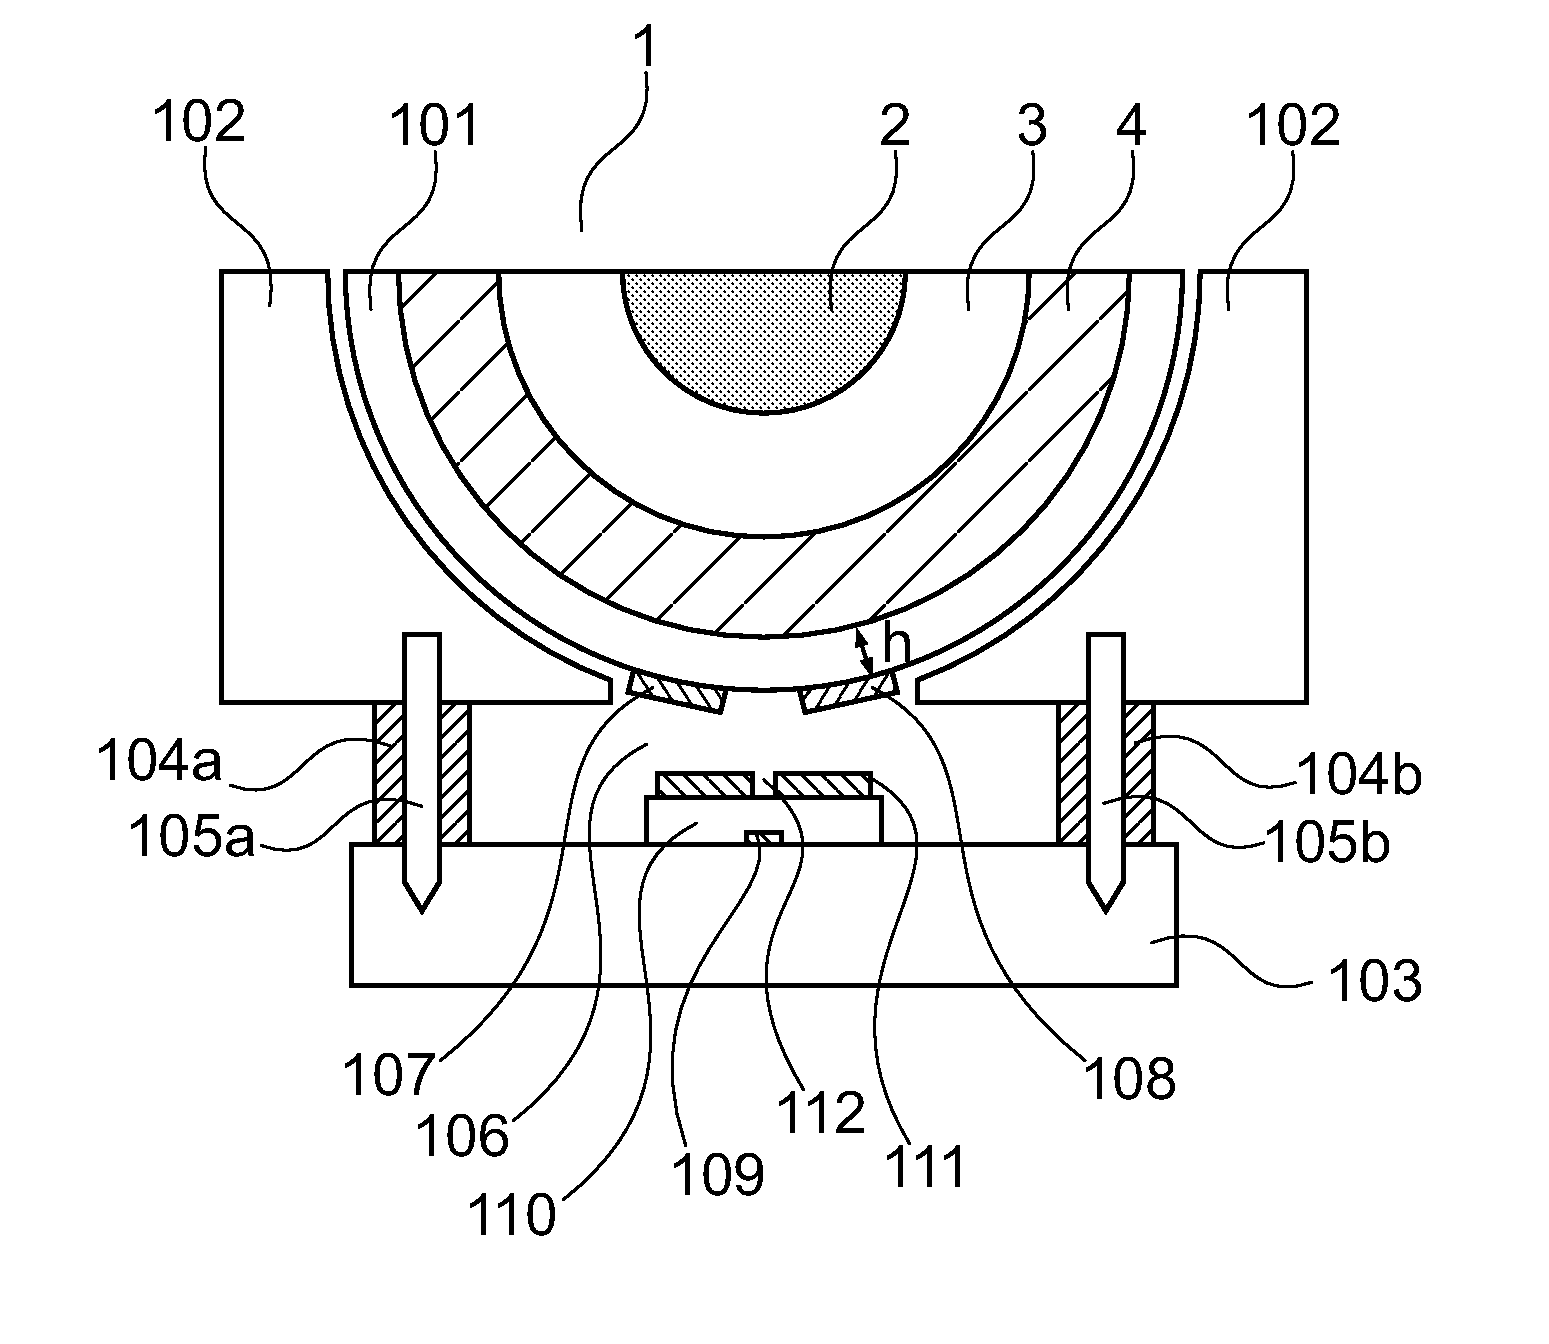 Inhomogeneous lens with maxwell's fish-eye type gradient index, antenna system and corresponding applications